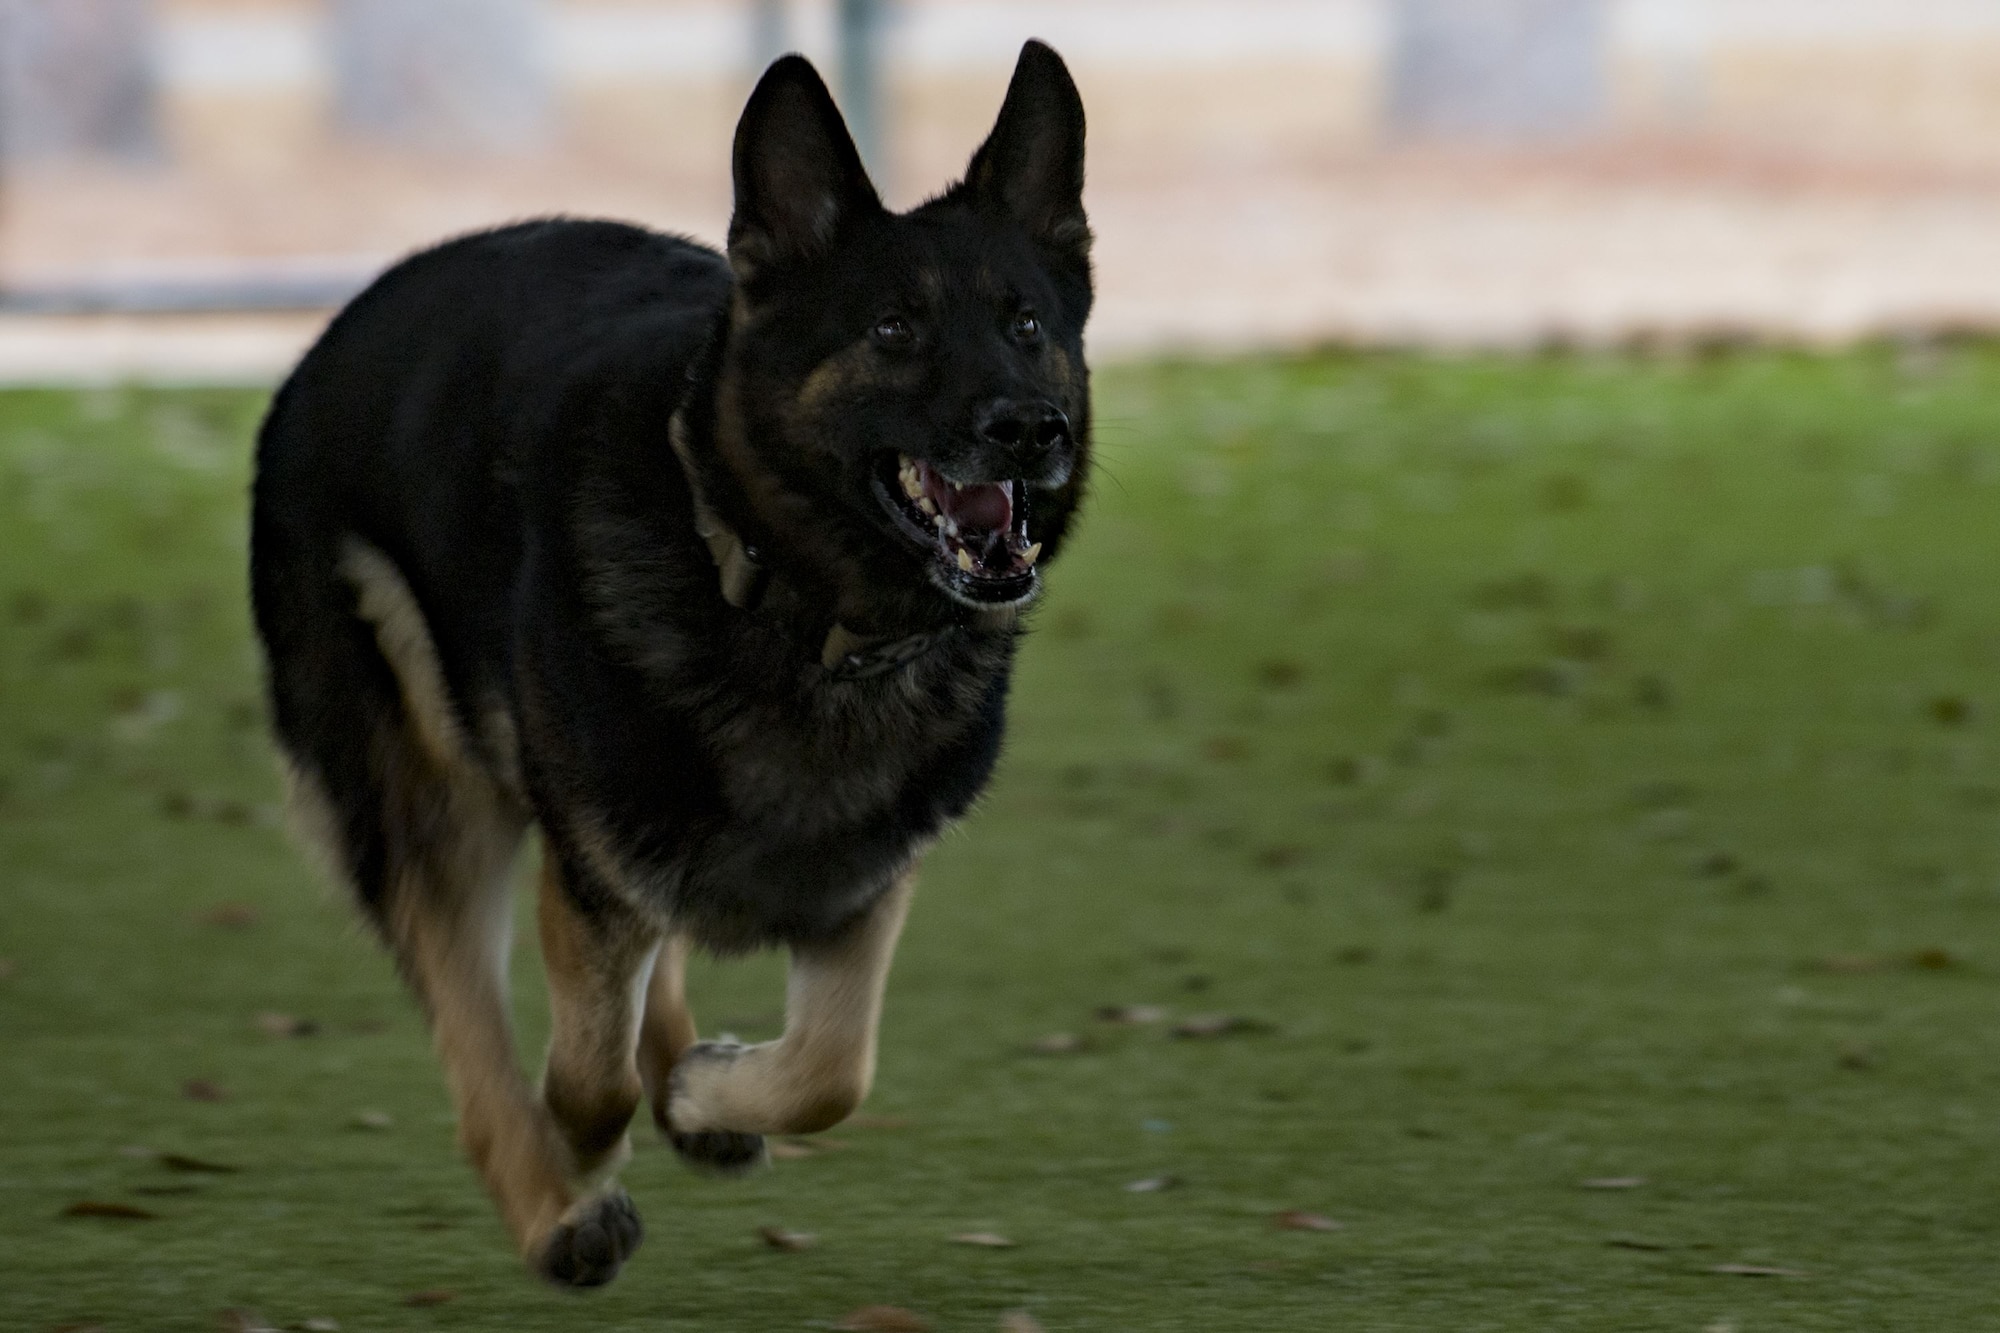 Military Working Dog (MWD) Falo sprints for an MWD capabilities demonstration during a Tour of Champions, Feb. 2, 2018, at Moody Air Force Base, Ga. The Tour of Champions recognizes 23d Wing annual award nominees and an opportunity to gain a better perspective of the 23d Wing’s mission. (U.S. Air Force photo by Senior Airman Daniel Snider)